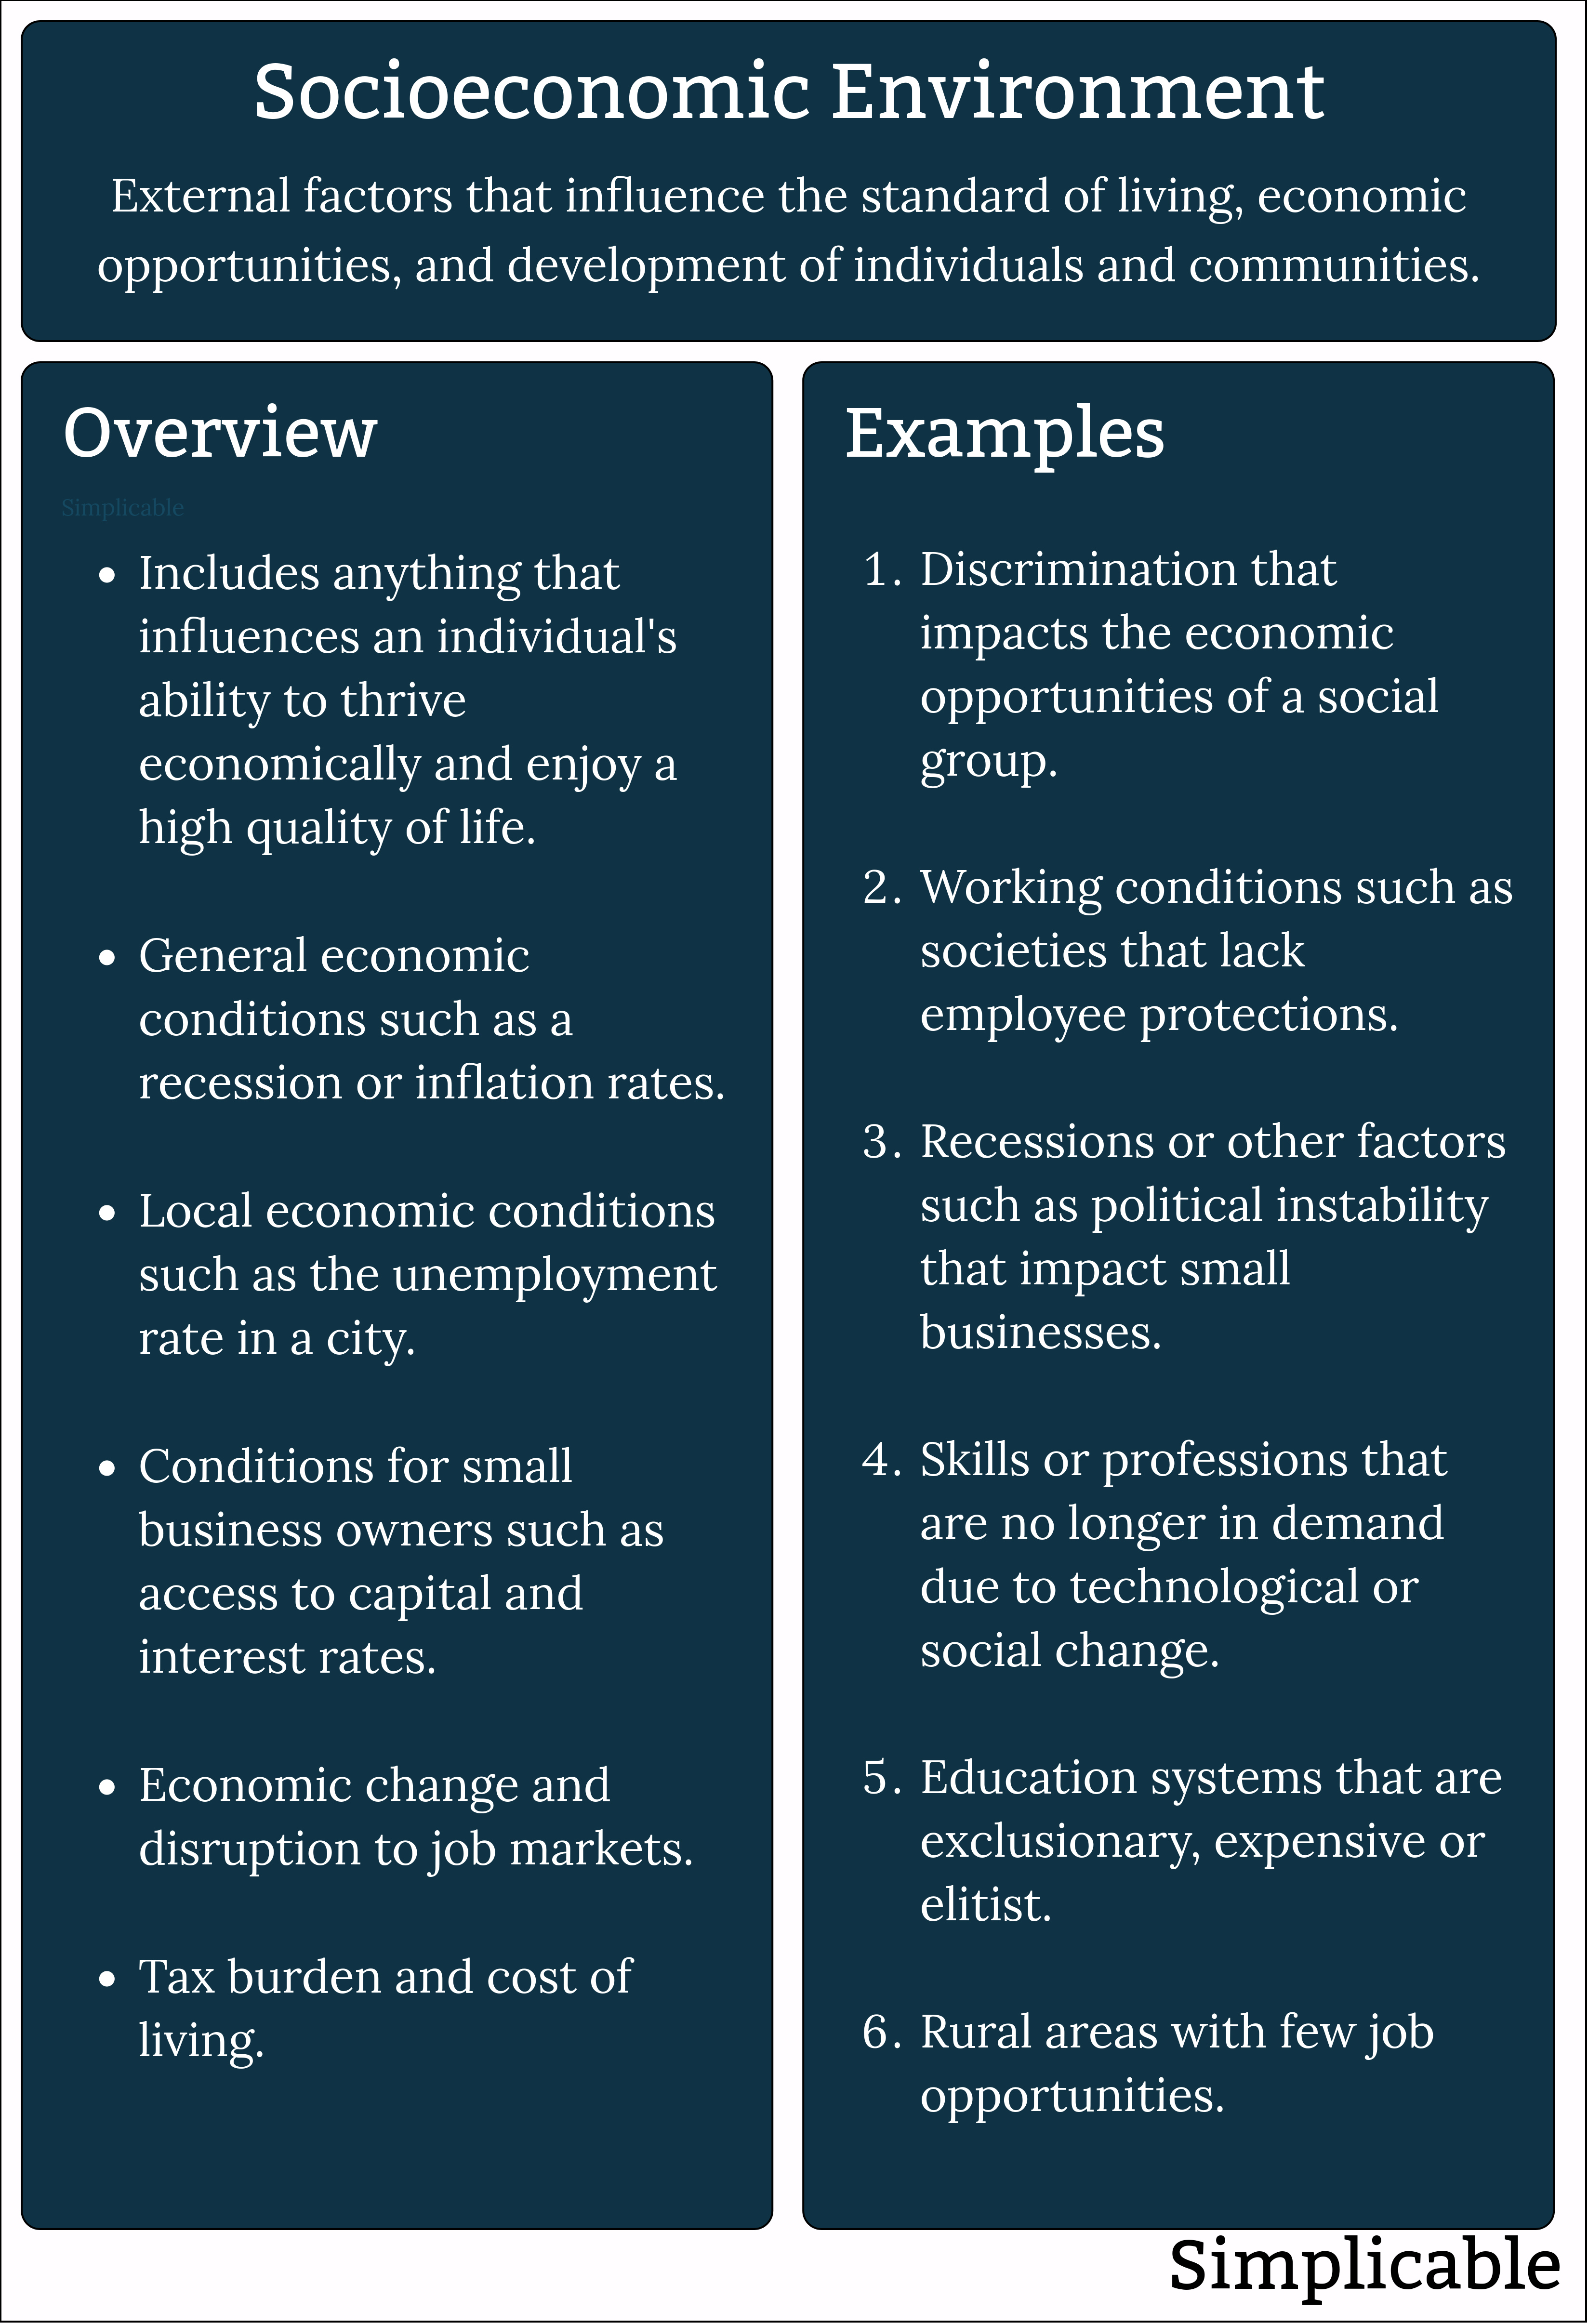 socioeconomic environment overview and examples